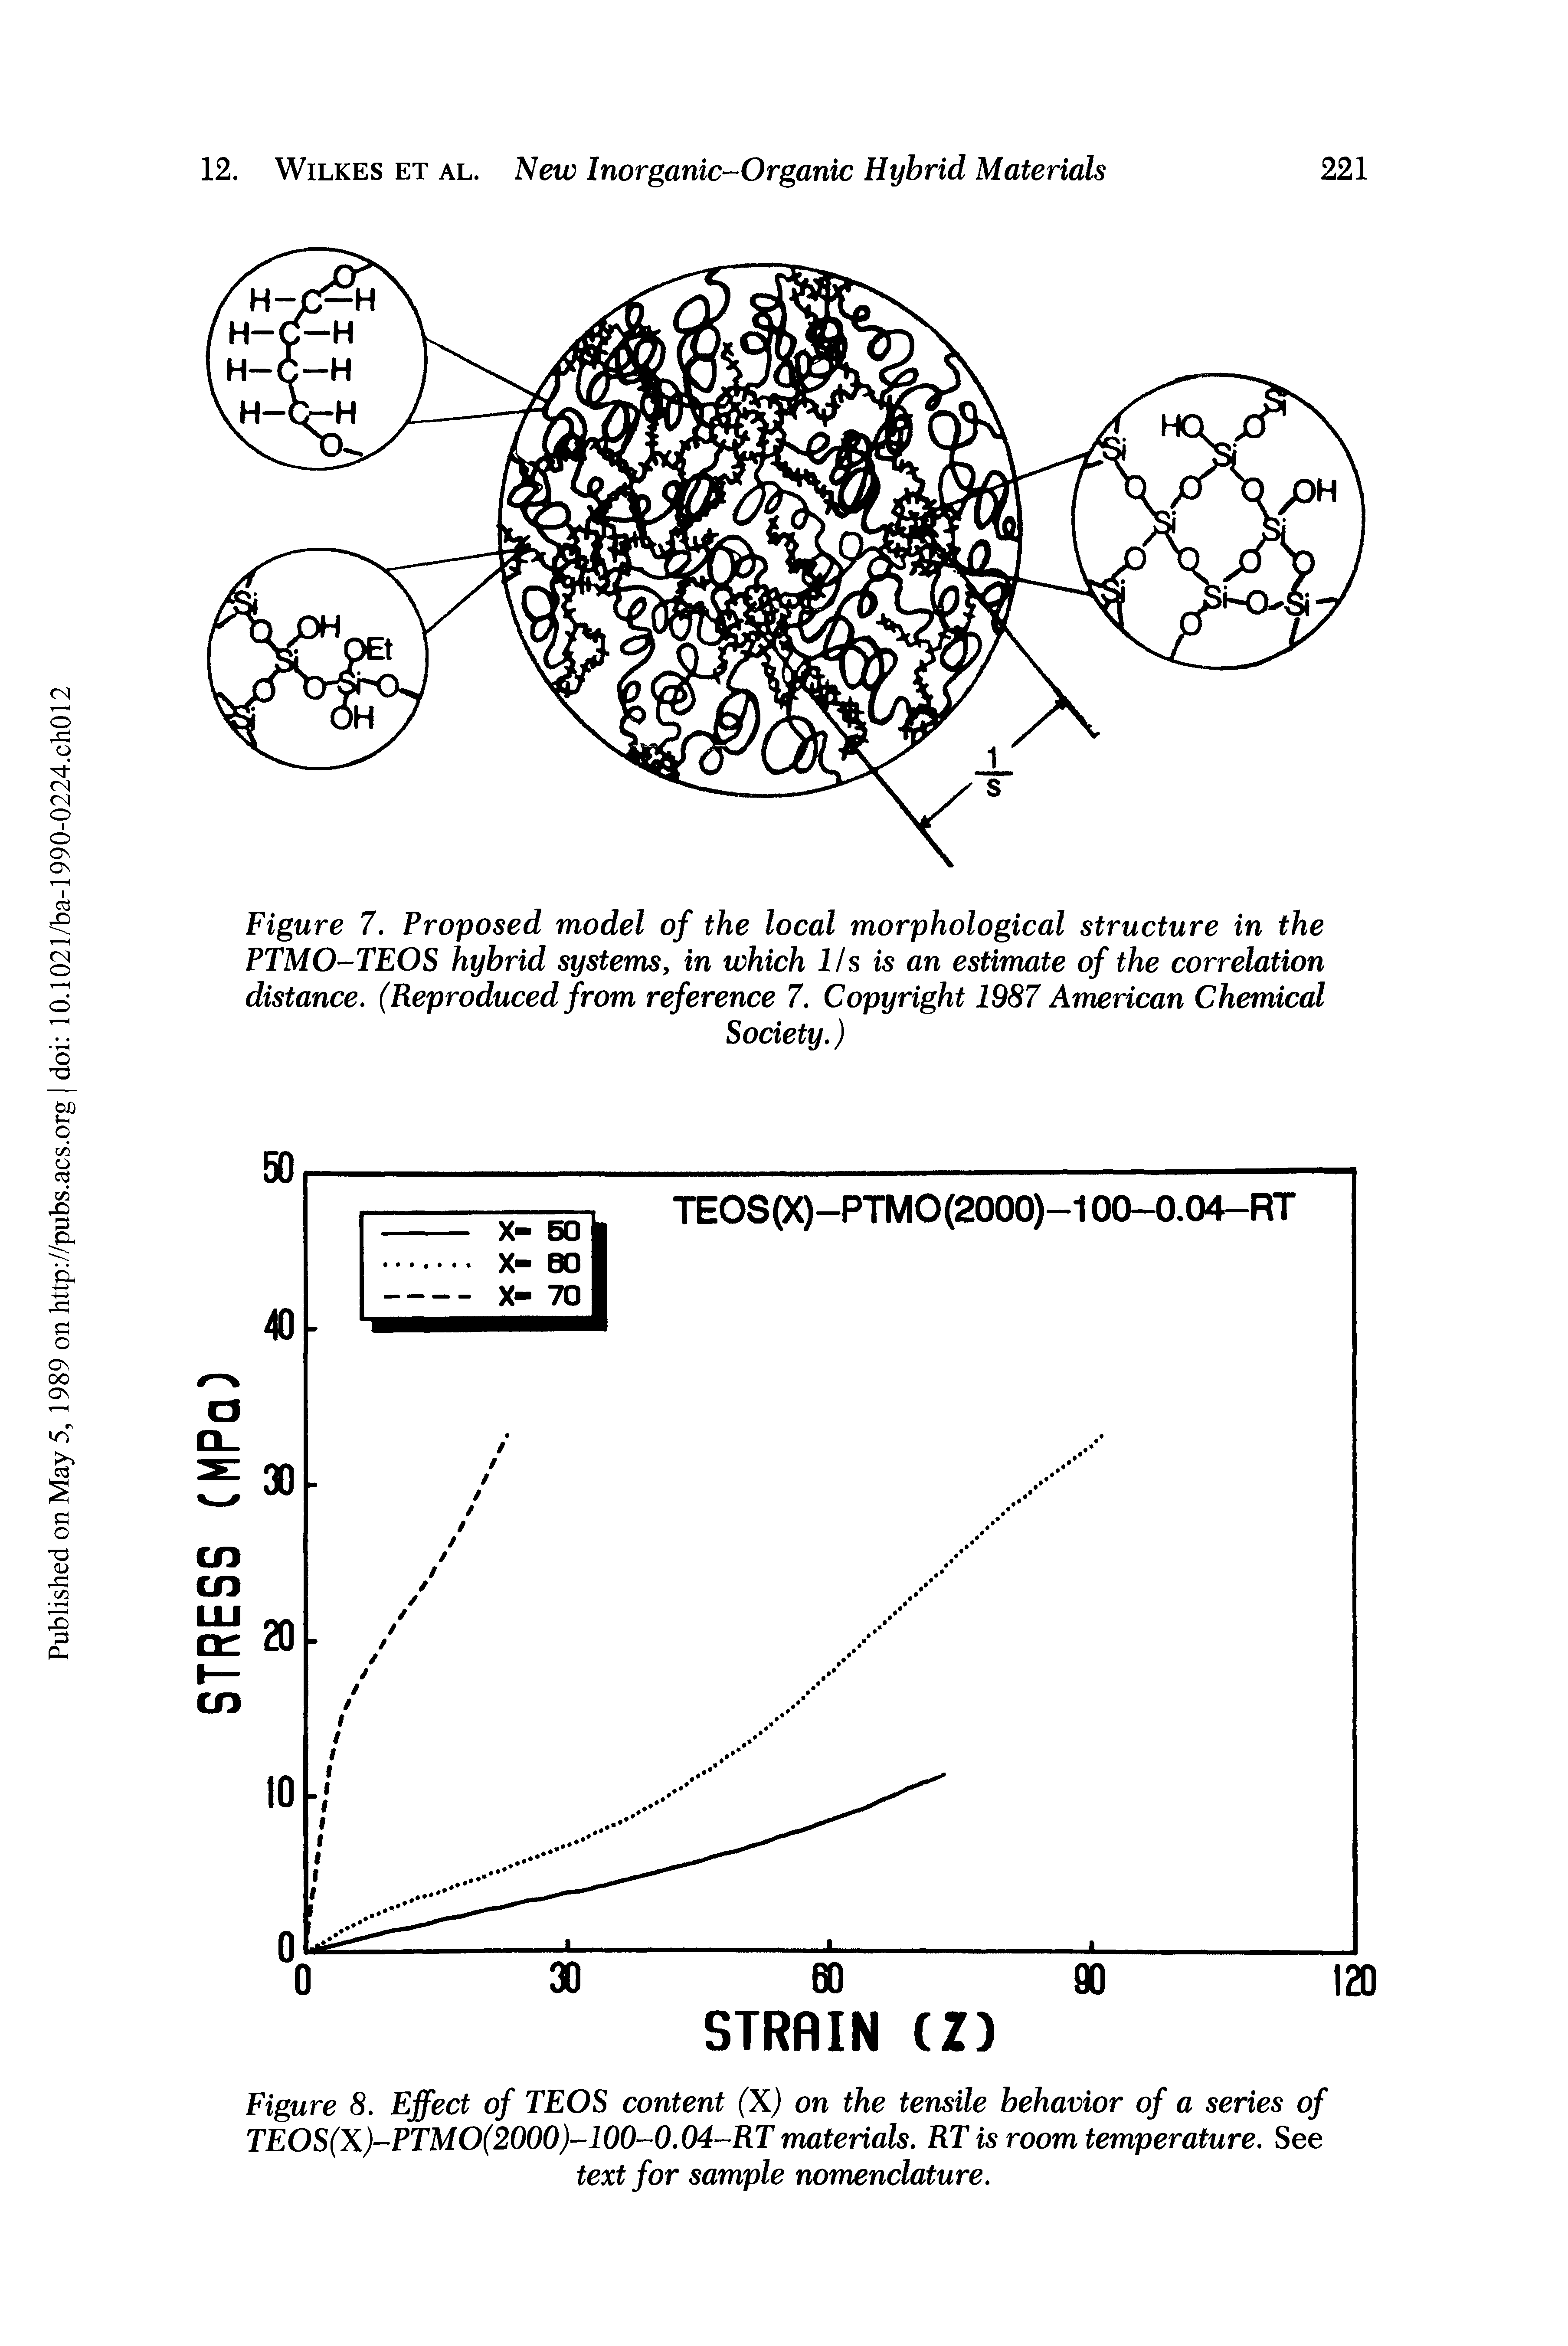 Figure 7. Proposed model of the local morphological structure in the PTMO-TEOS hybrid systems, in which 1/s is an estimate of the correlation distance, (Reproduced from reference 7. Copyright 1987 American Chemical...